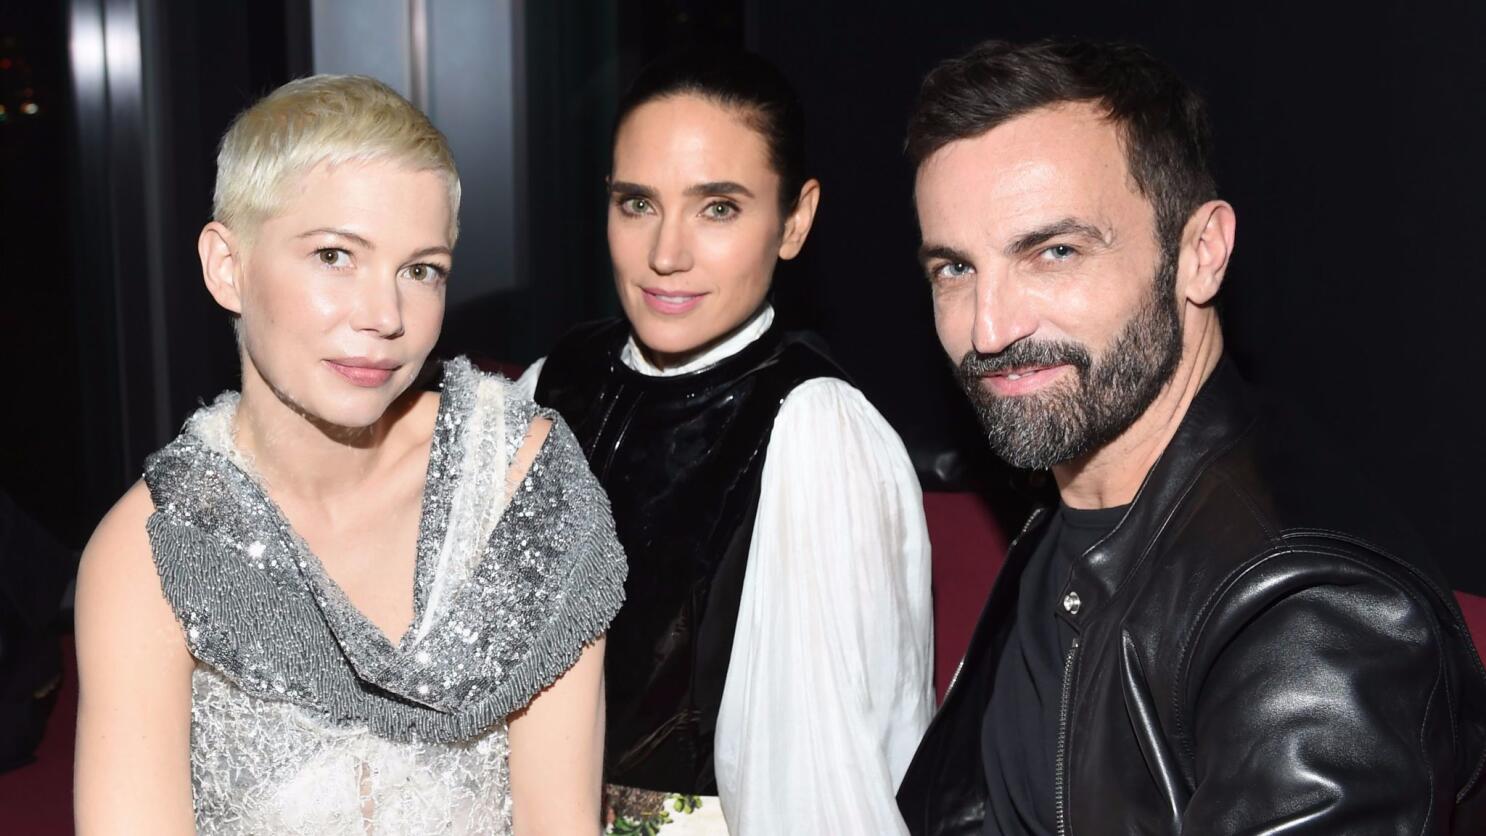 Justin Theroux poses with Nicolas Ghesquiere after the Louis